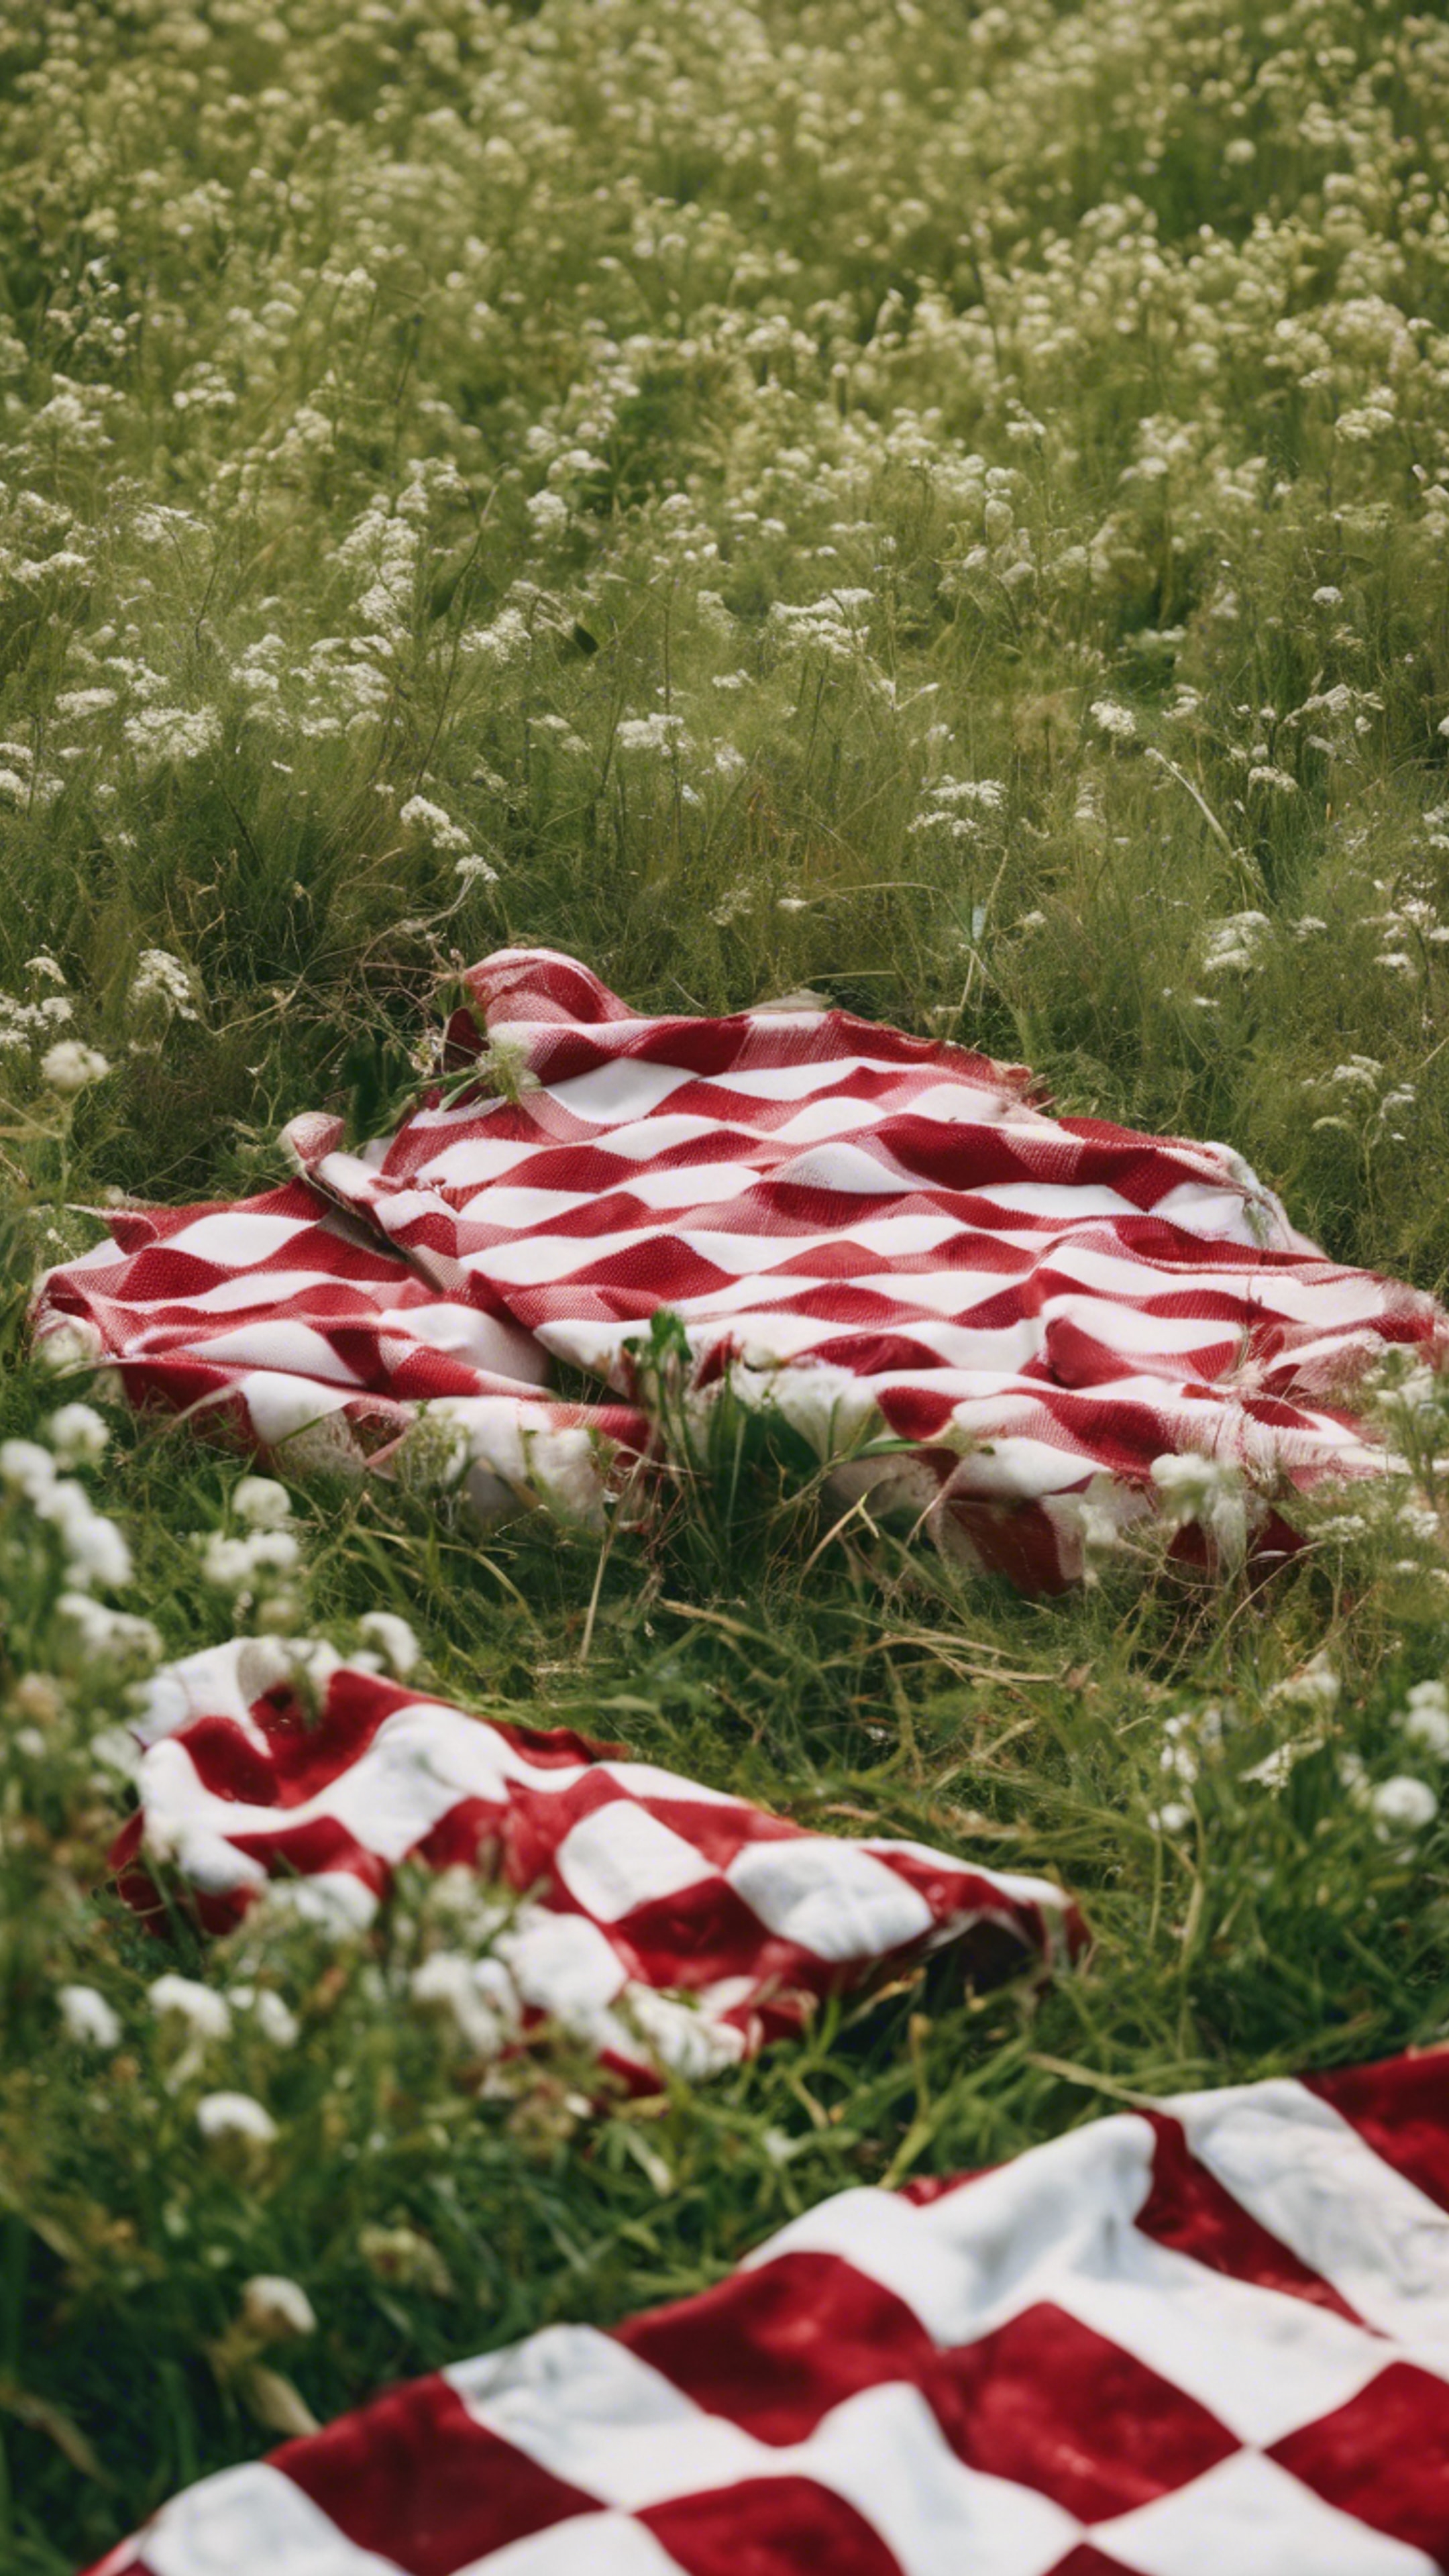 A red and white checkered picnic blanket spread out in a lush green field. טפט[d3f97e971ed8445aa31d]